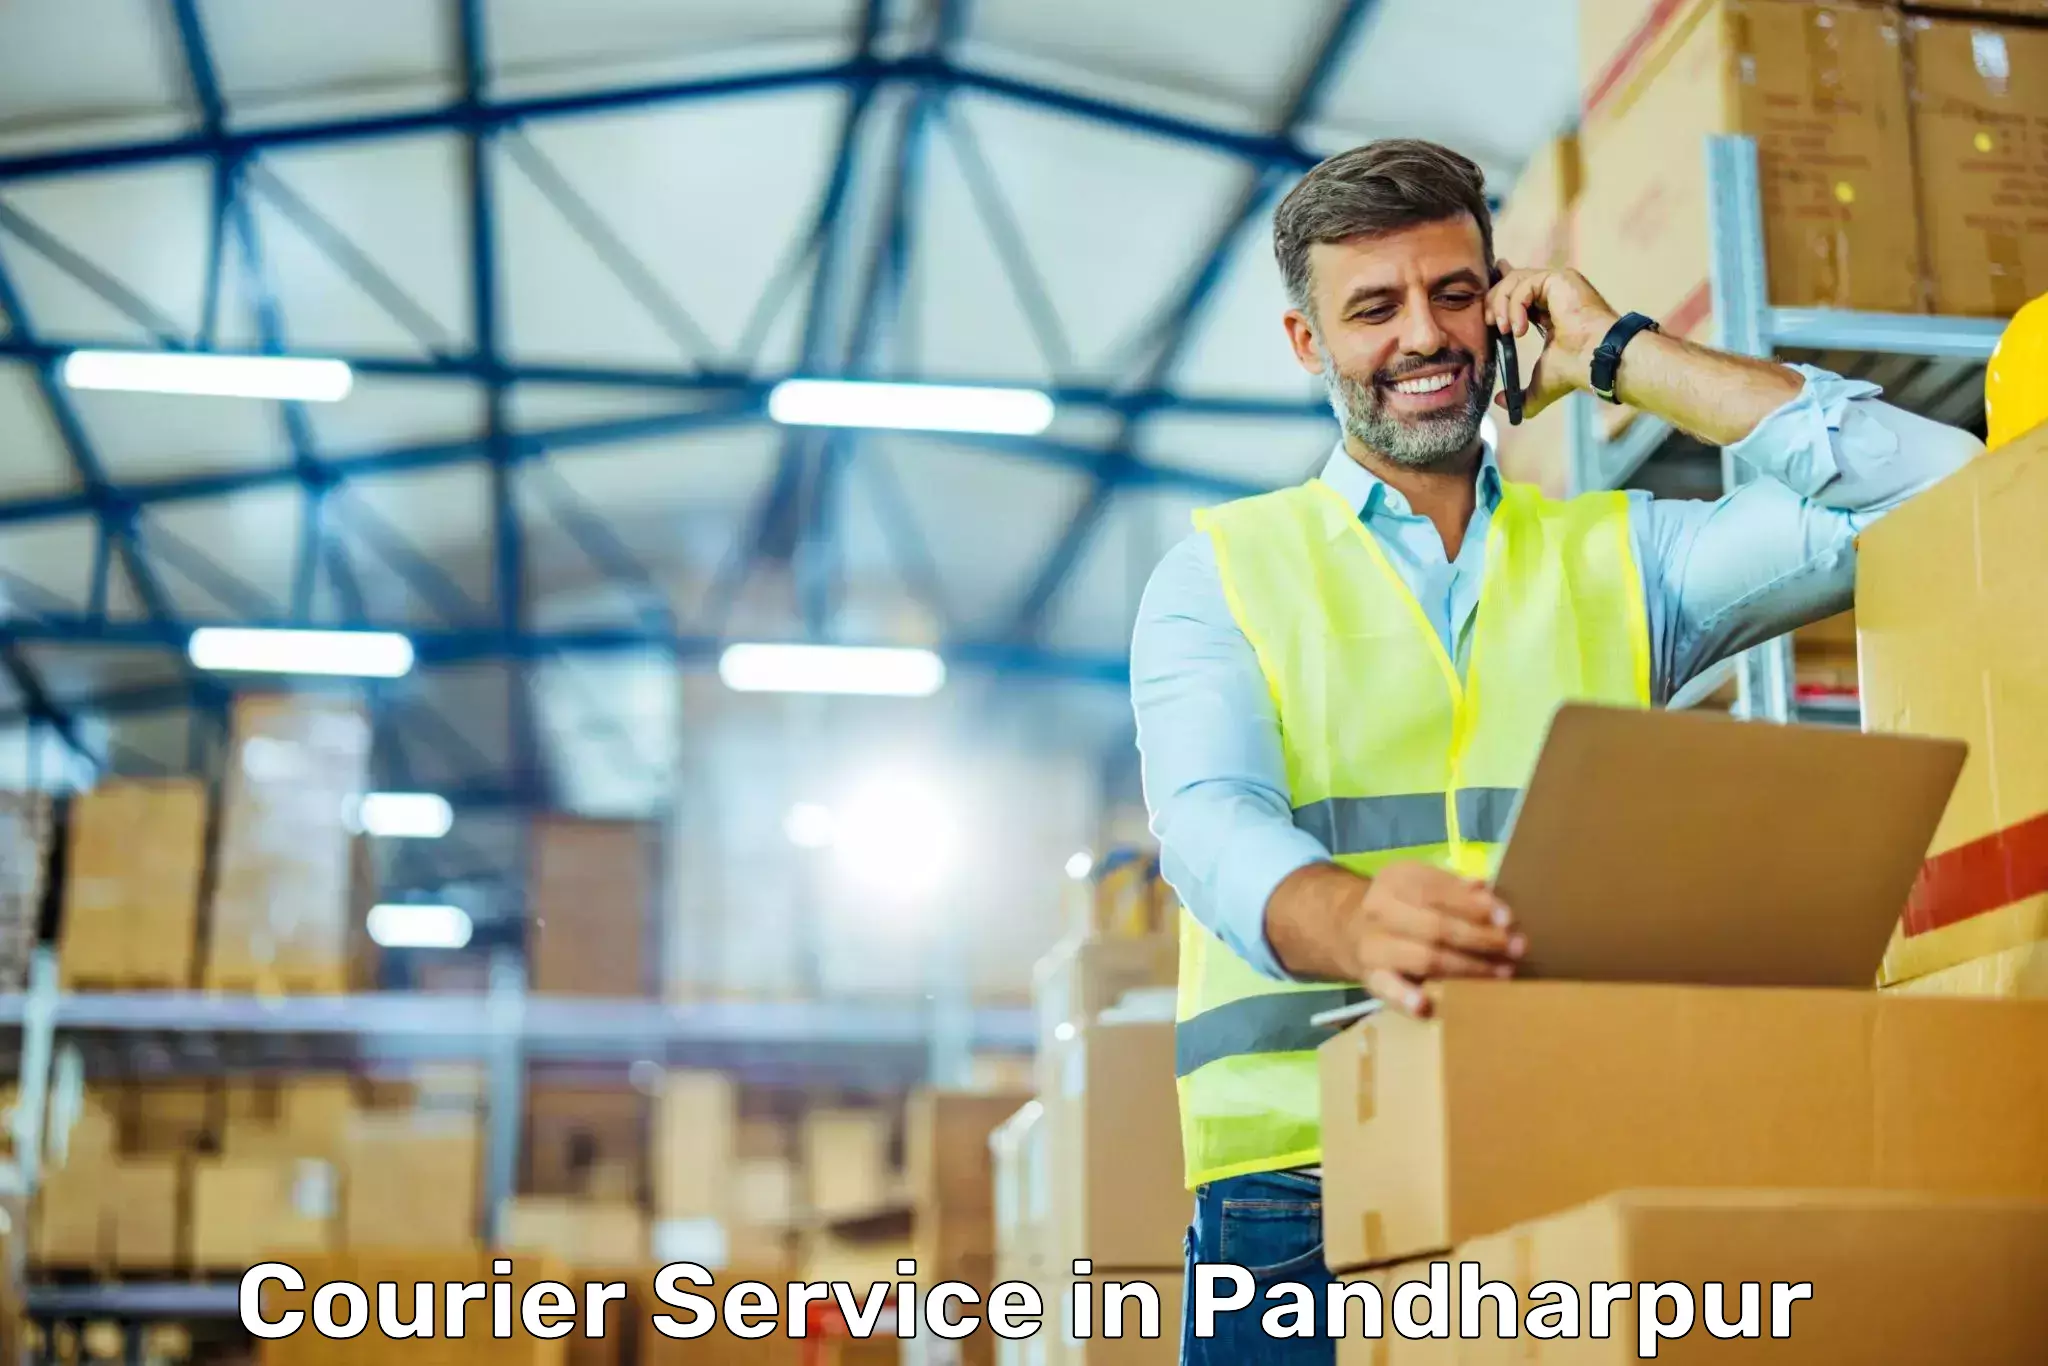 Budget-friendly shipping in Pandharpur